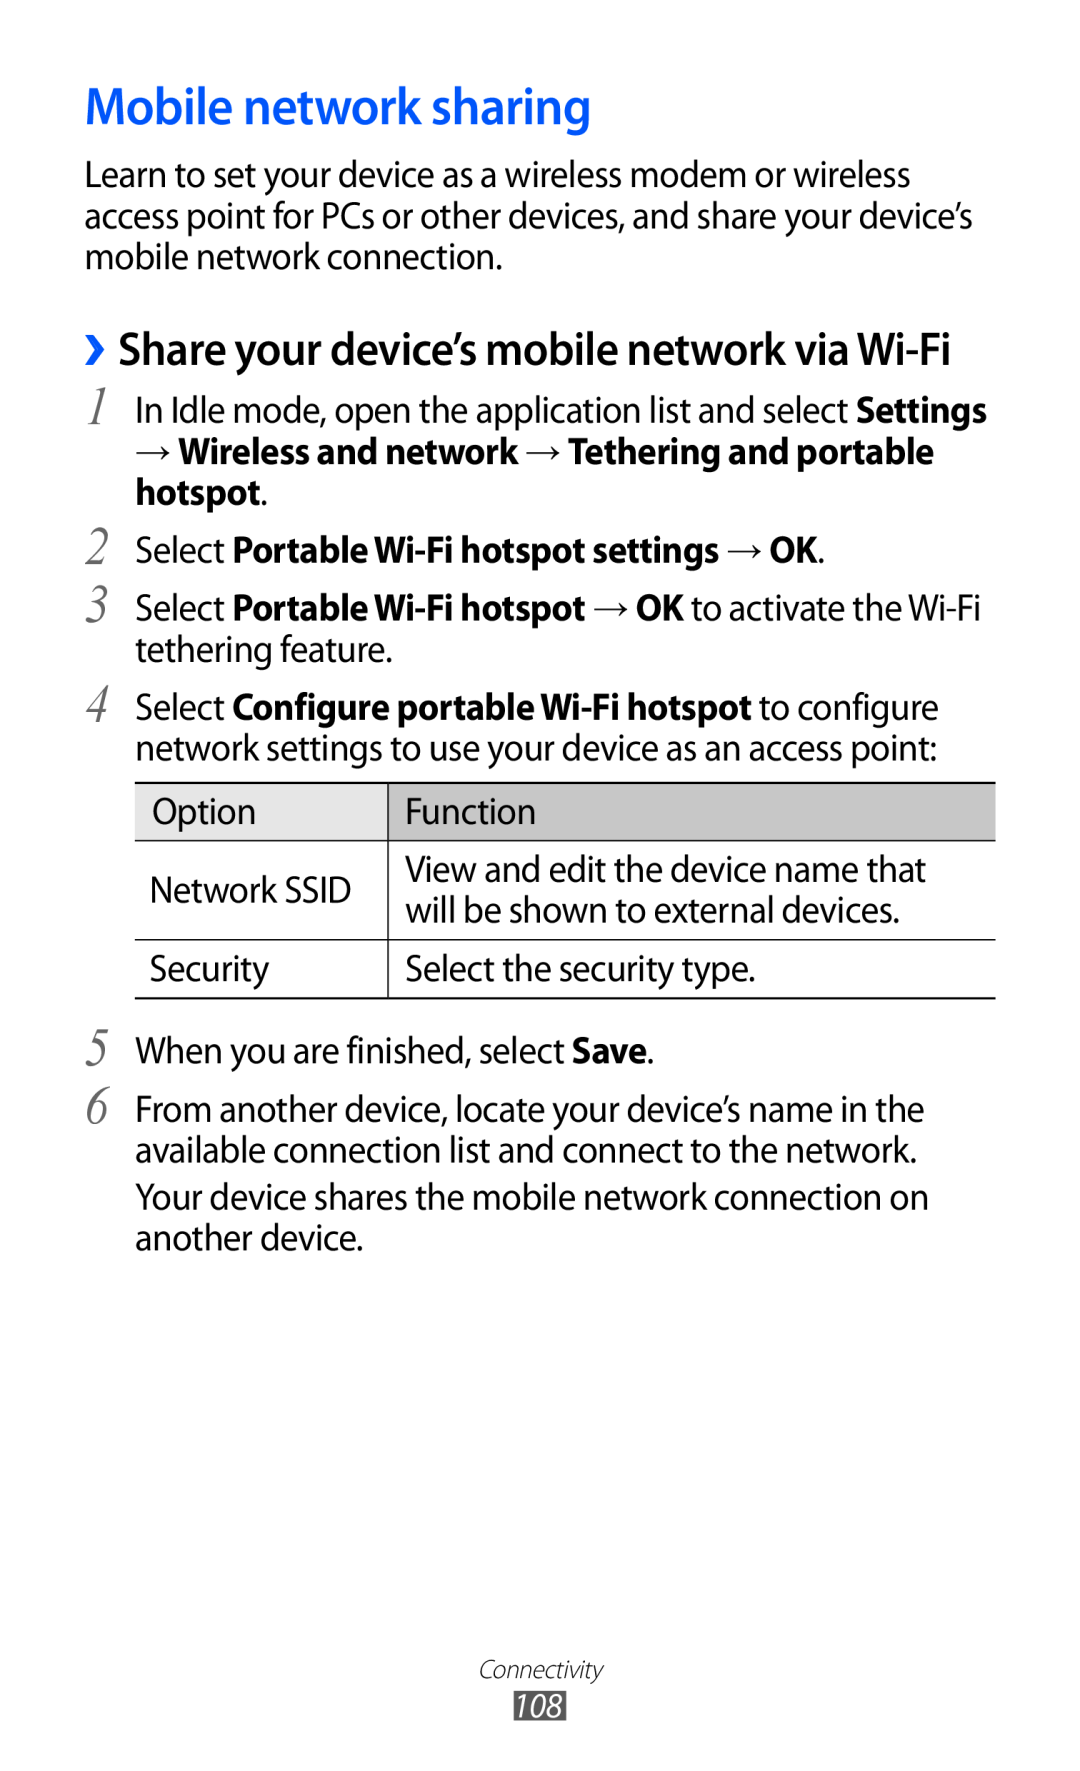 Samsung GT-I9070 user manual Mobile network sharing, ››Share your device’s mobile network via Wi-Fi 